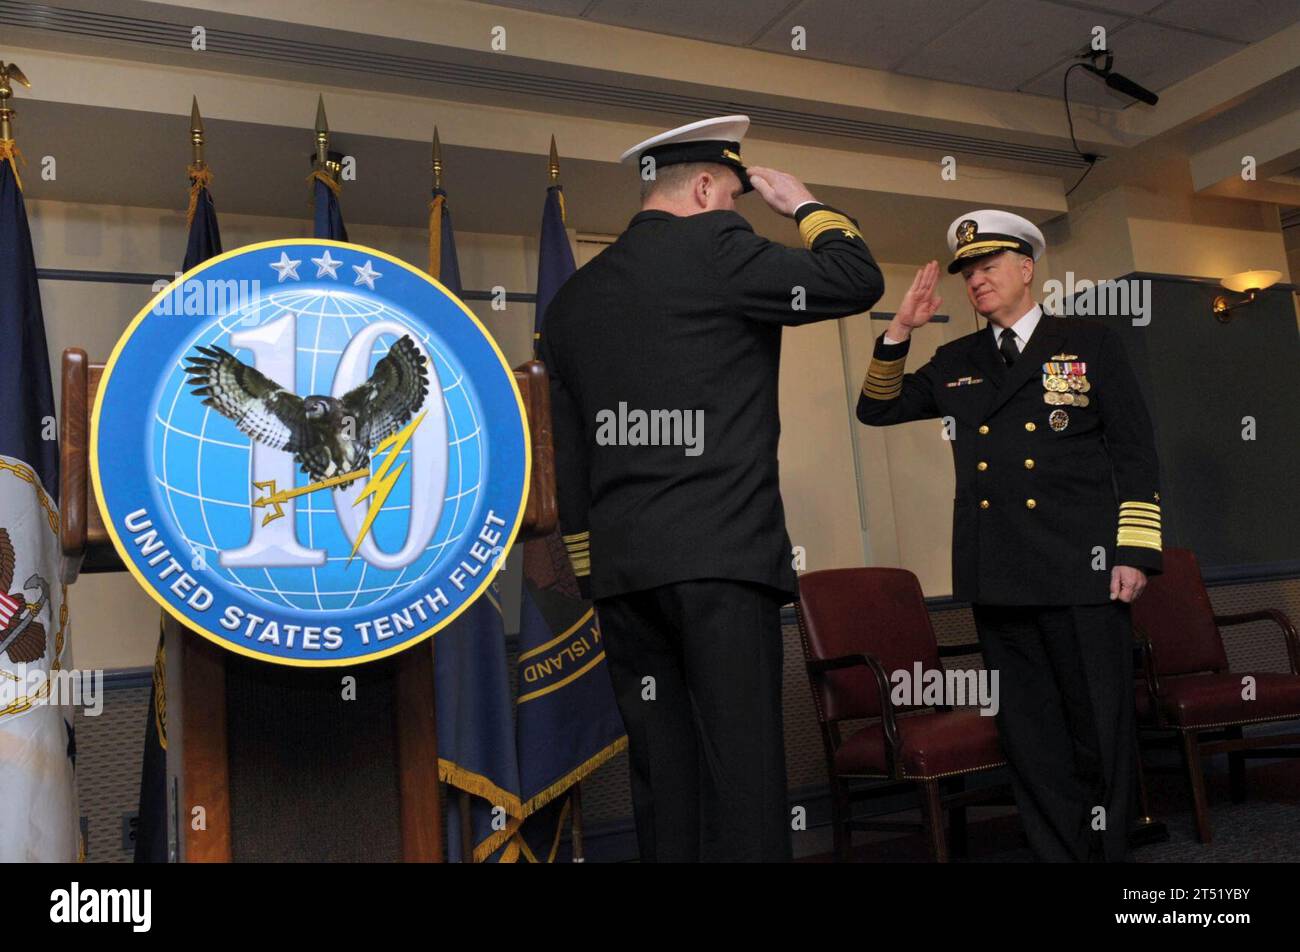 1001298273J-048 FT. MEADE, Md.  (Jan. 29, 2009)  Chief of Naval Operations (CNO) Adm. Gary Roughead salutes Vice Adm. Barry McCullough, commander of U.S. Fleet Cyber Command and U.S. 10th Fleet at the commissioning ceremony for U.S. Fleet Cyber Command at Ft. George G. Meade, Md. Navy Stock Photo